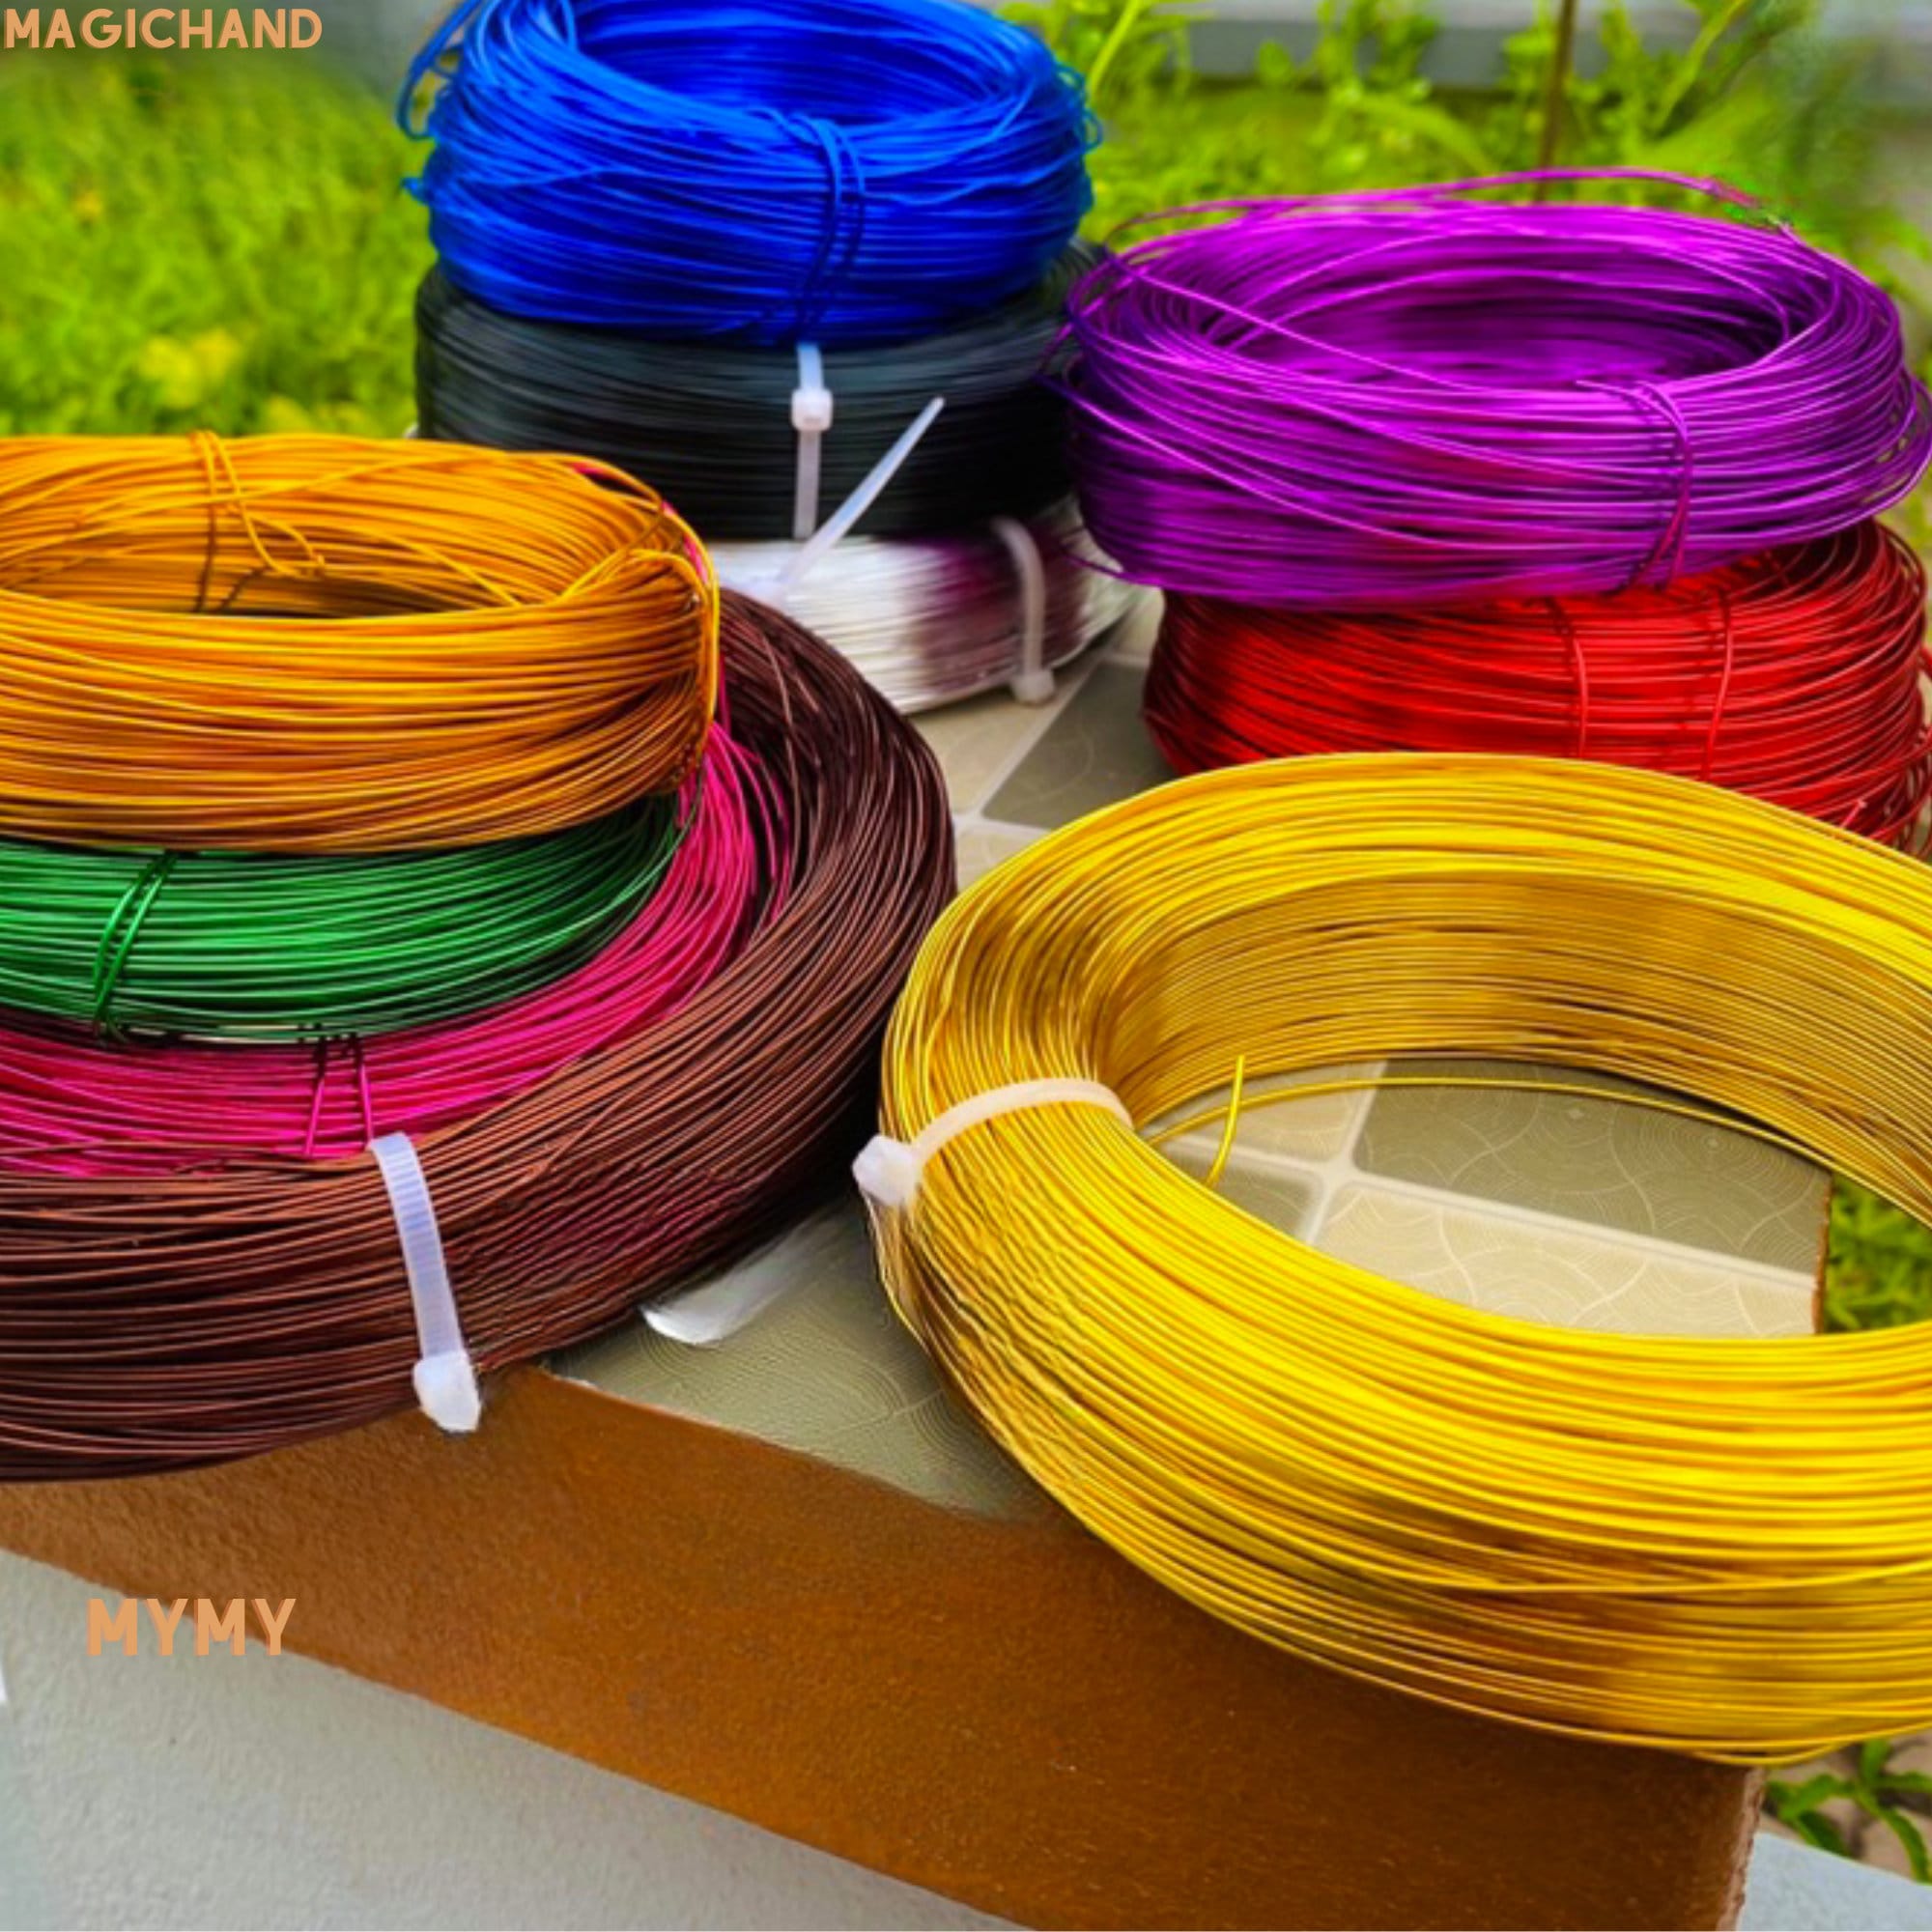 1.25mm thick cotton twine string pack of 6 spools size ref 6